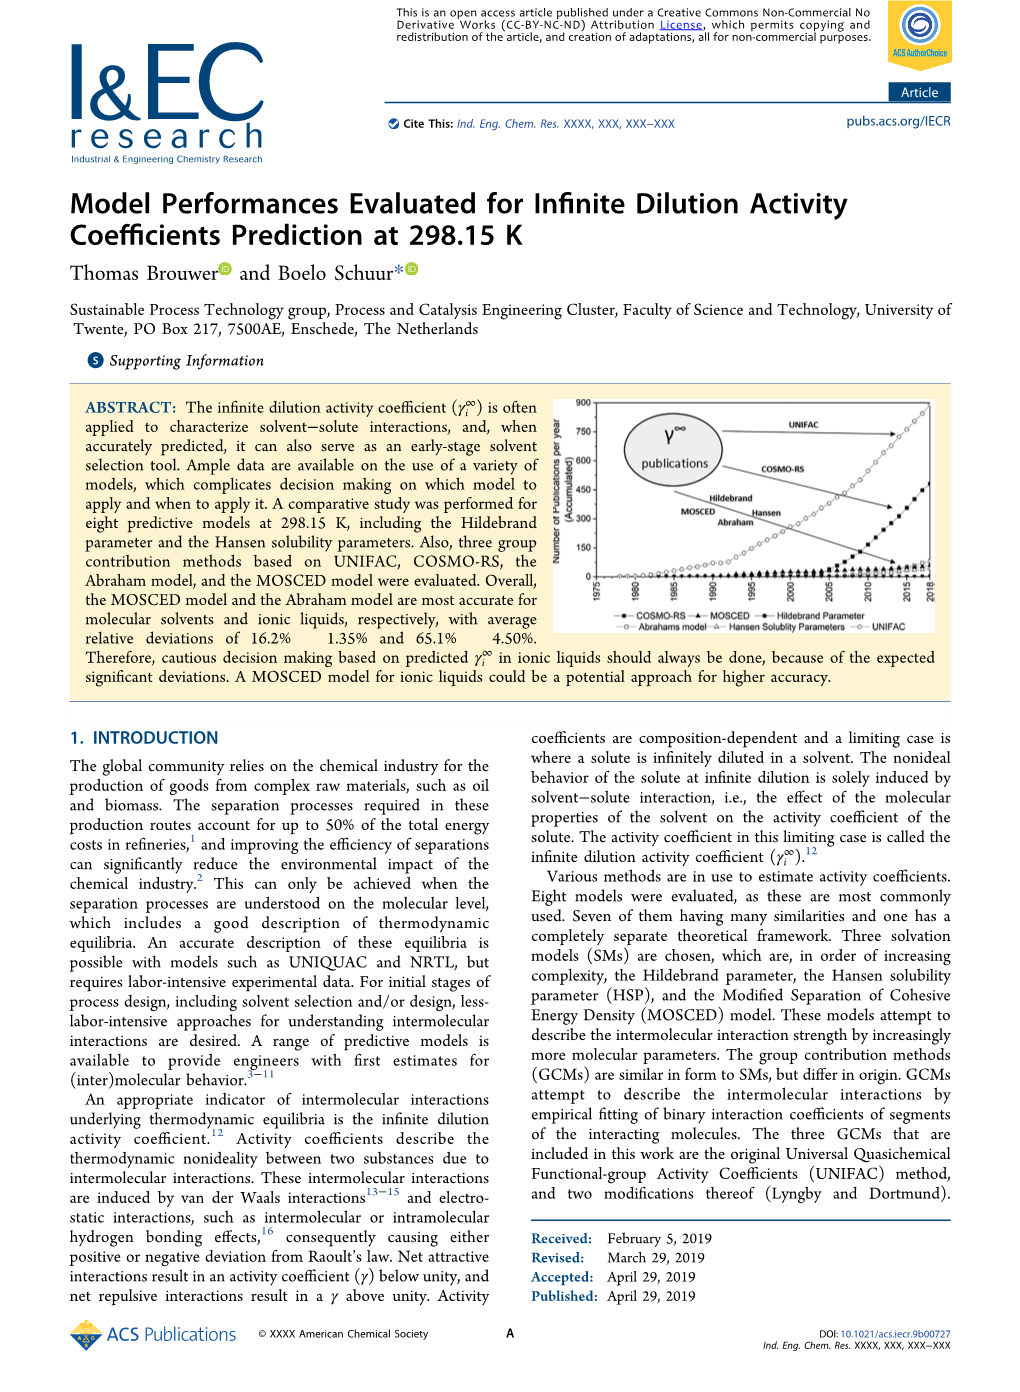 Model Performances Evaluated for Infinite Dilution Activity Coefficients